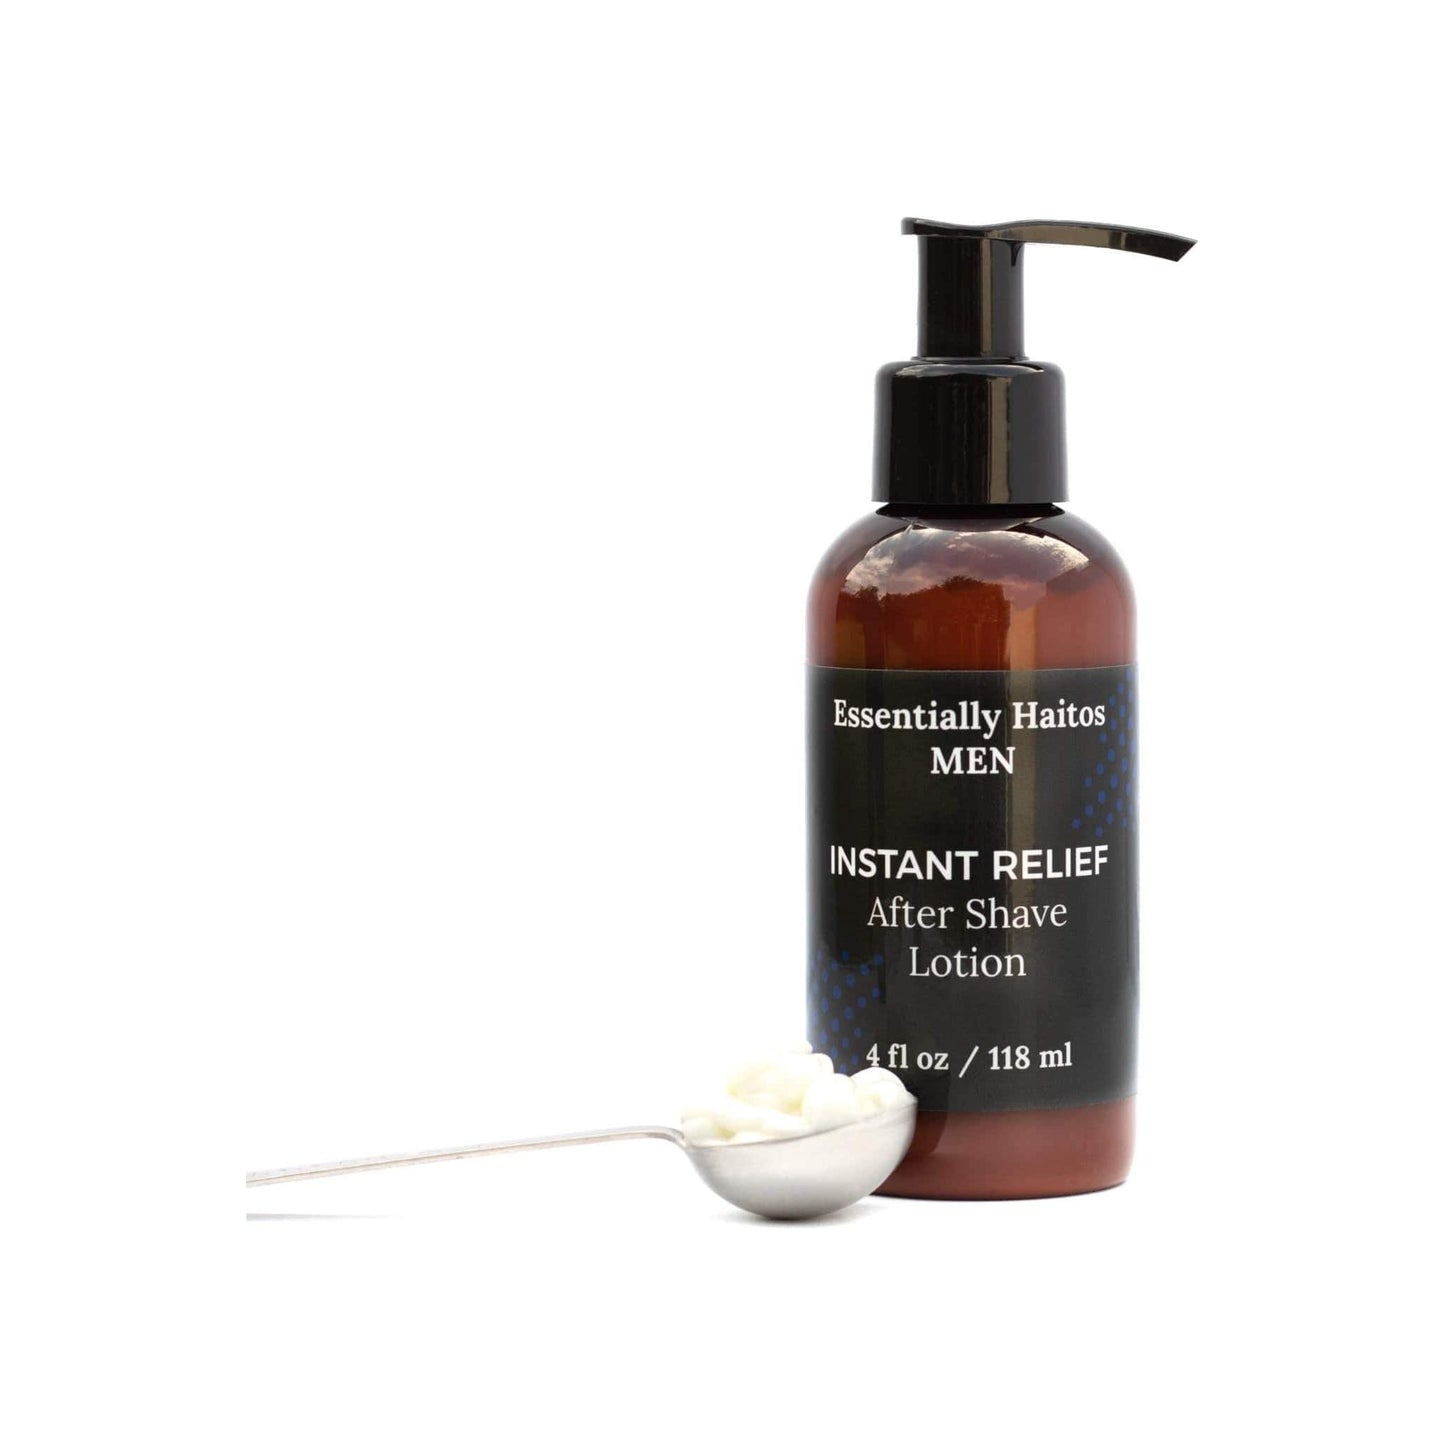 Instant Relief After Shave Lotion